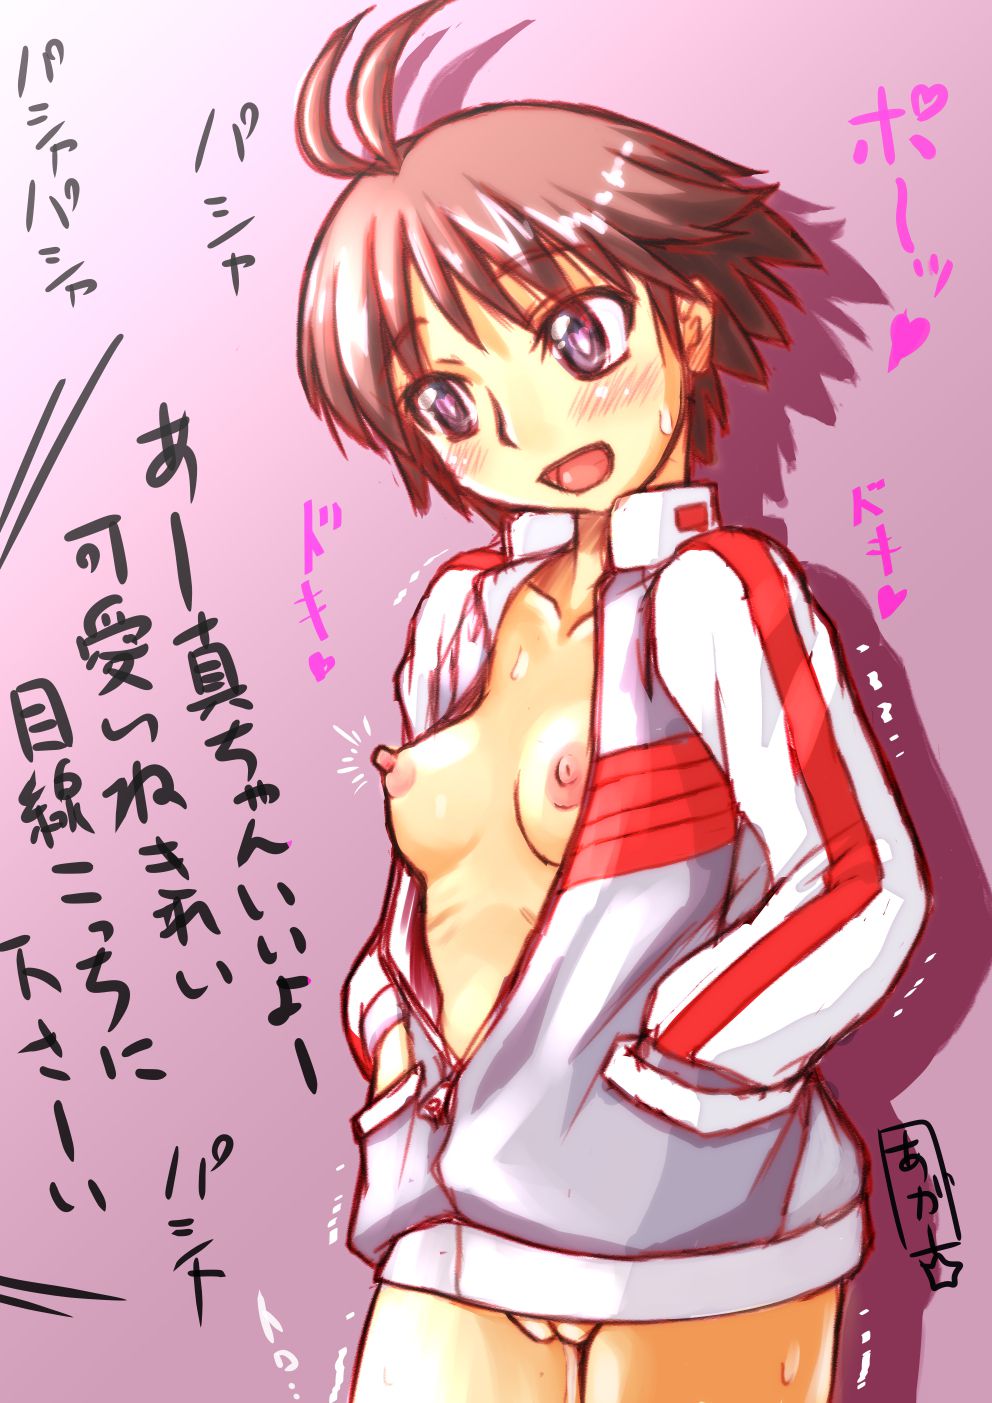 The second erotic image of the sporty girl wearing the jersey wwww part3 27